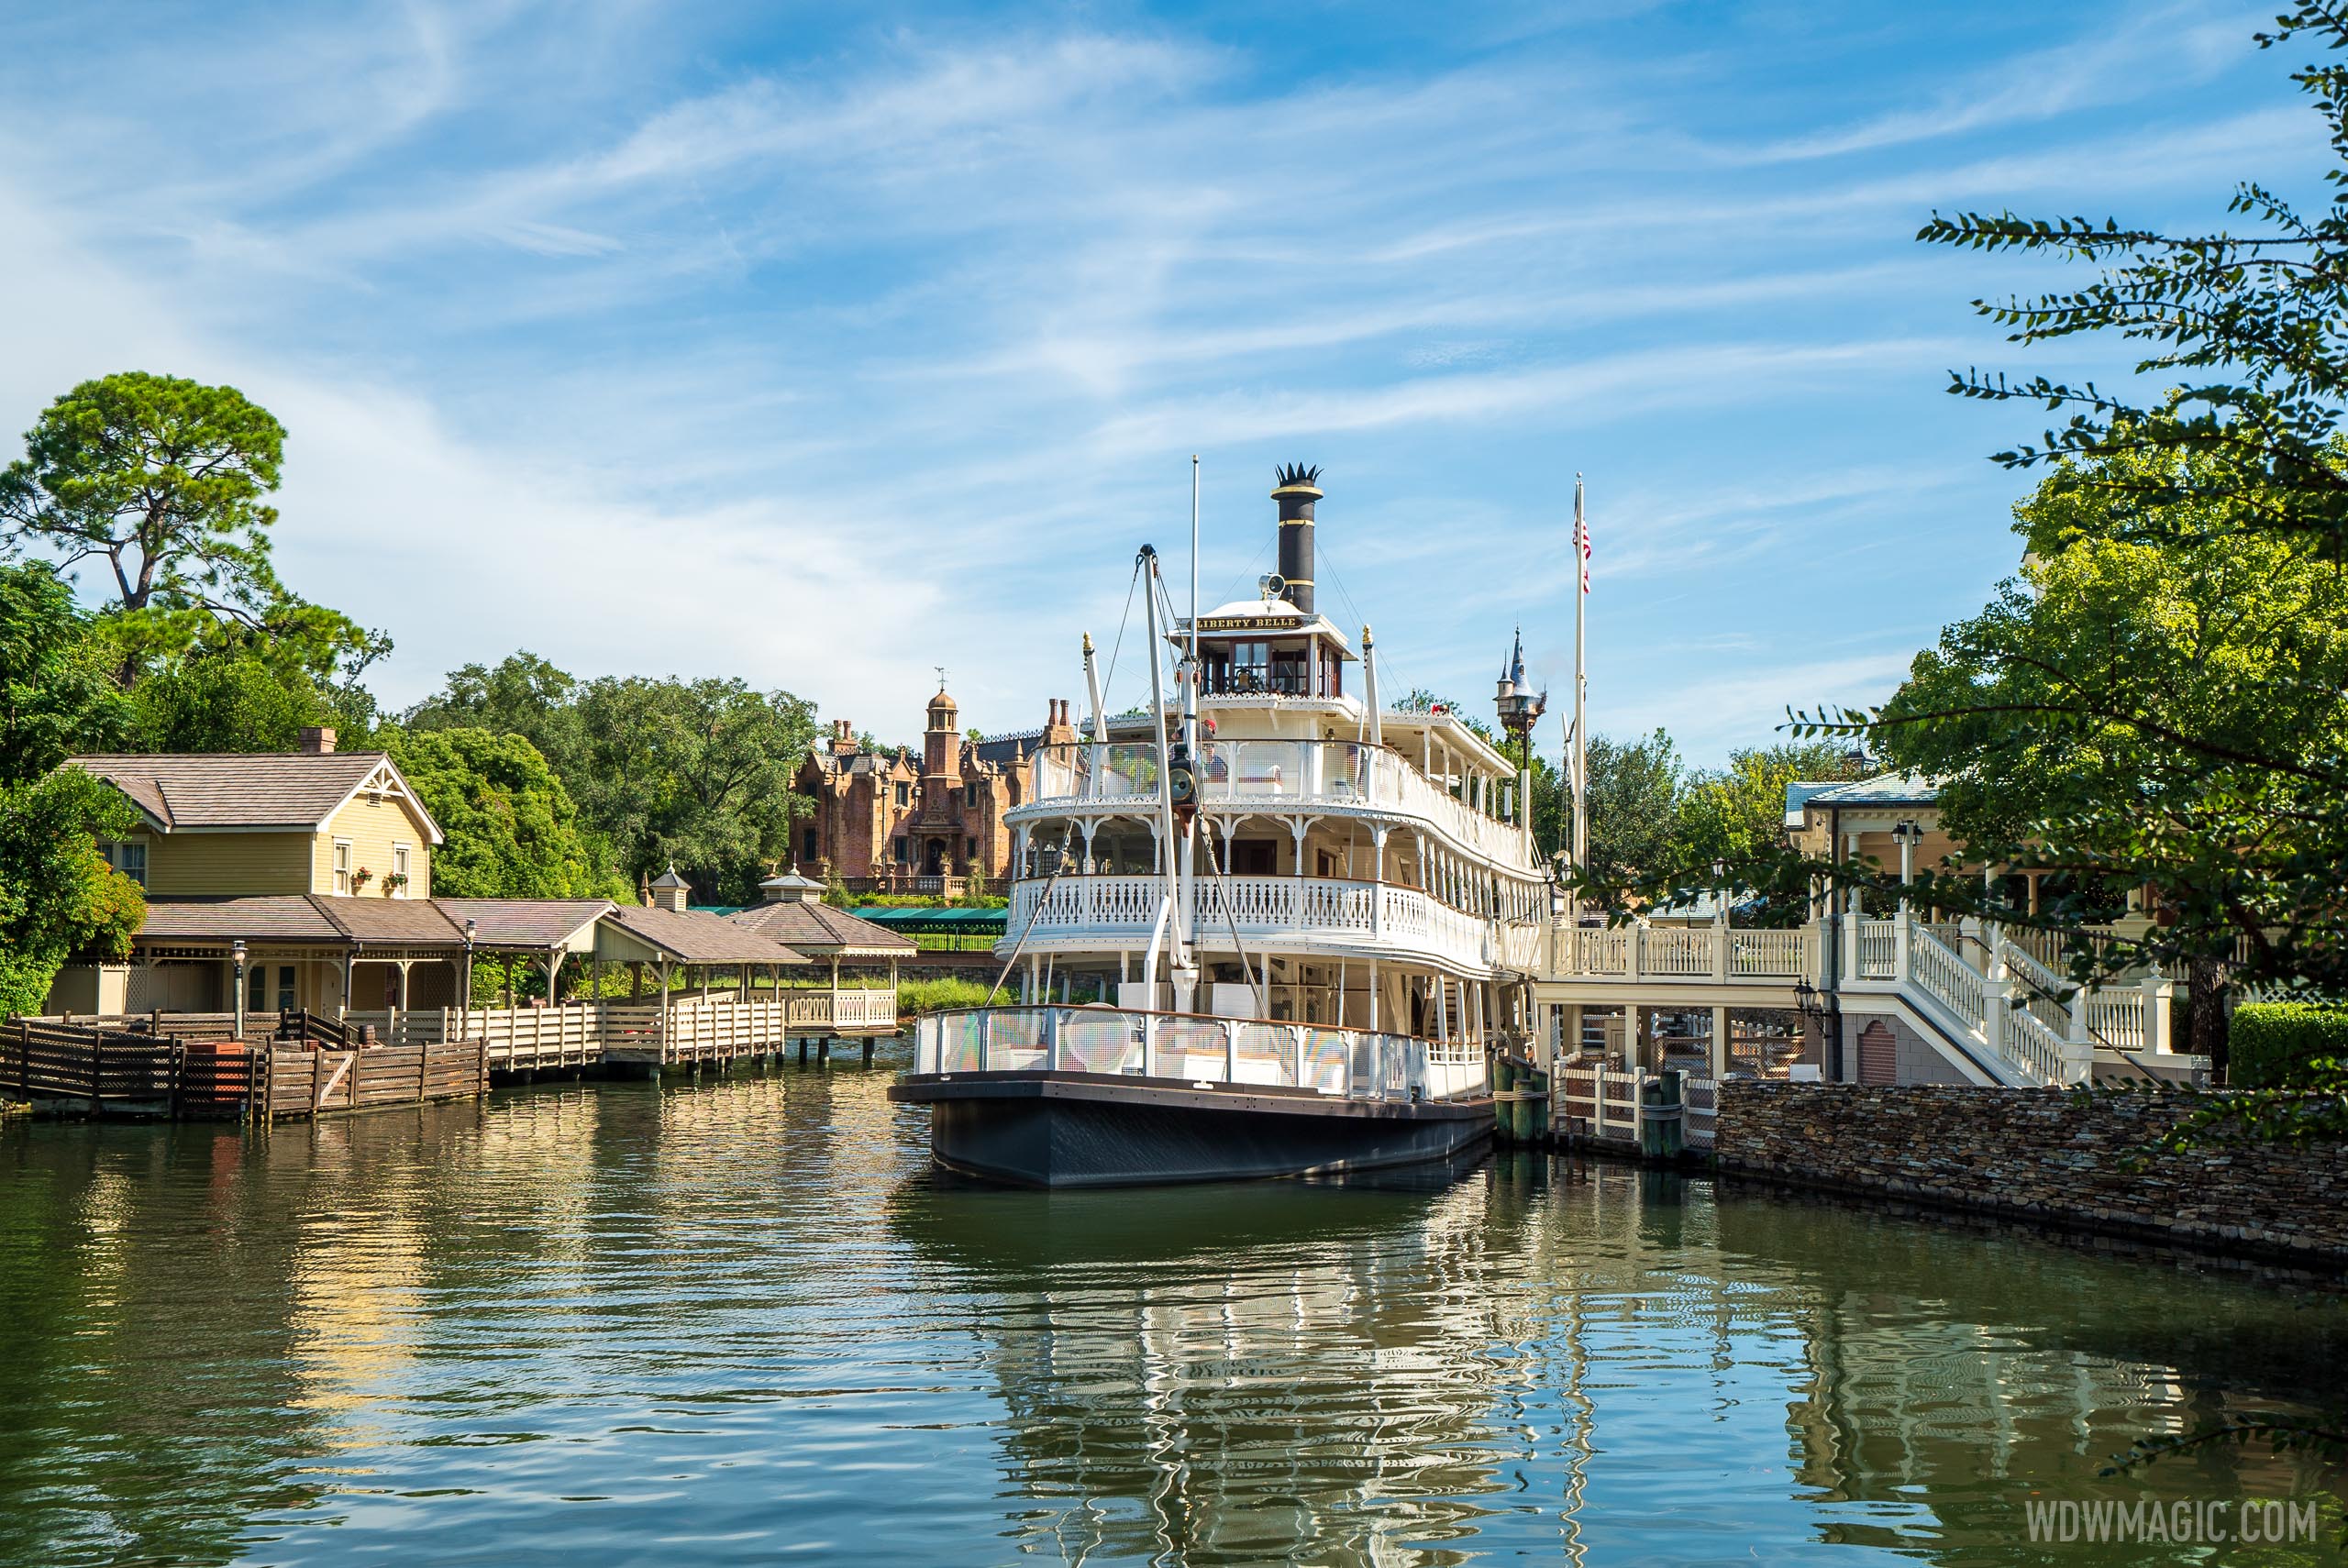 The Riverboat will return to service on Friday February 5